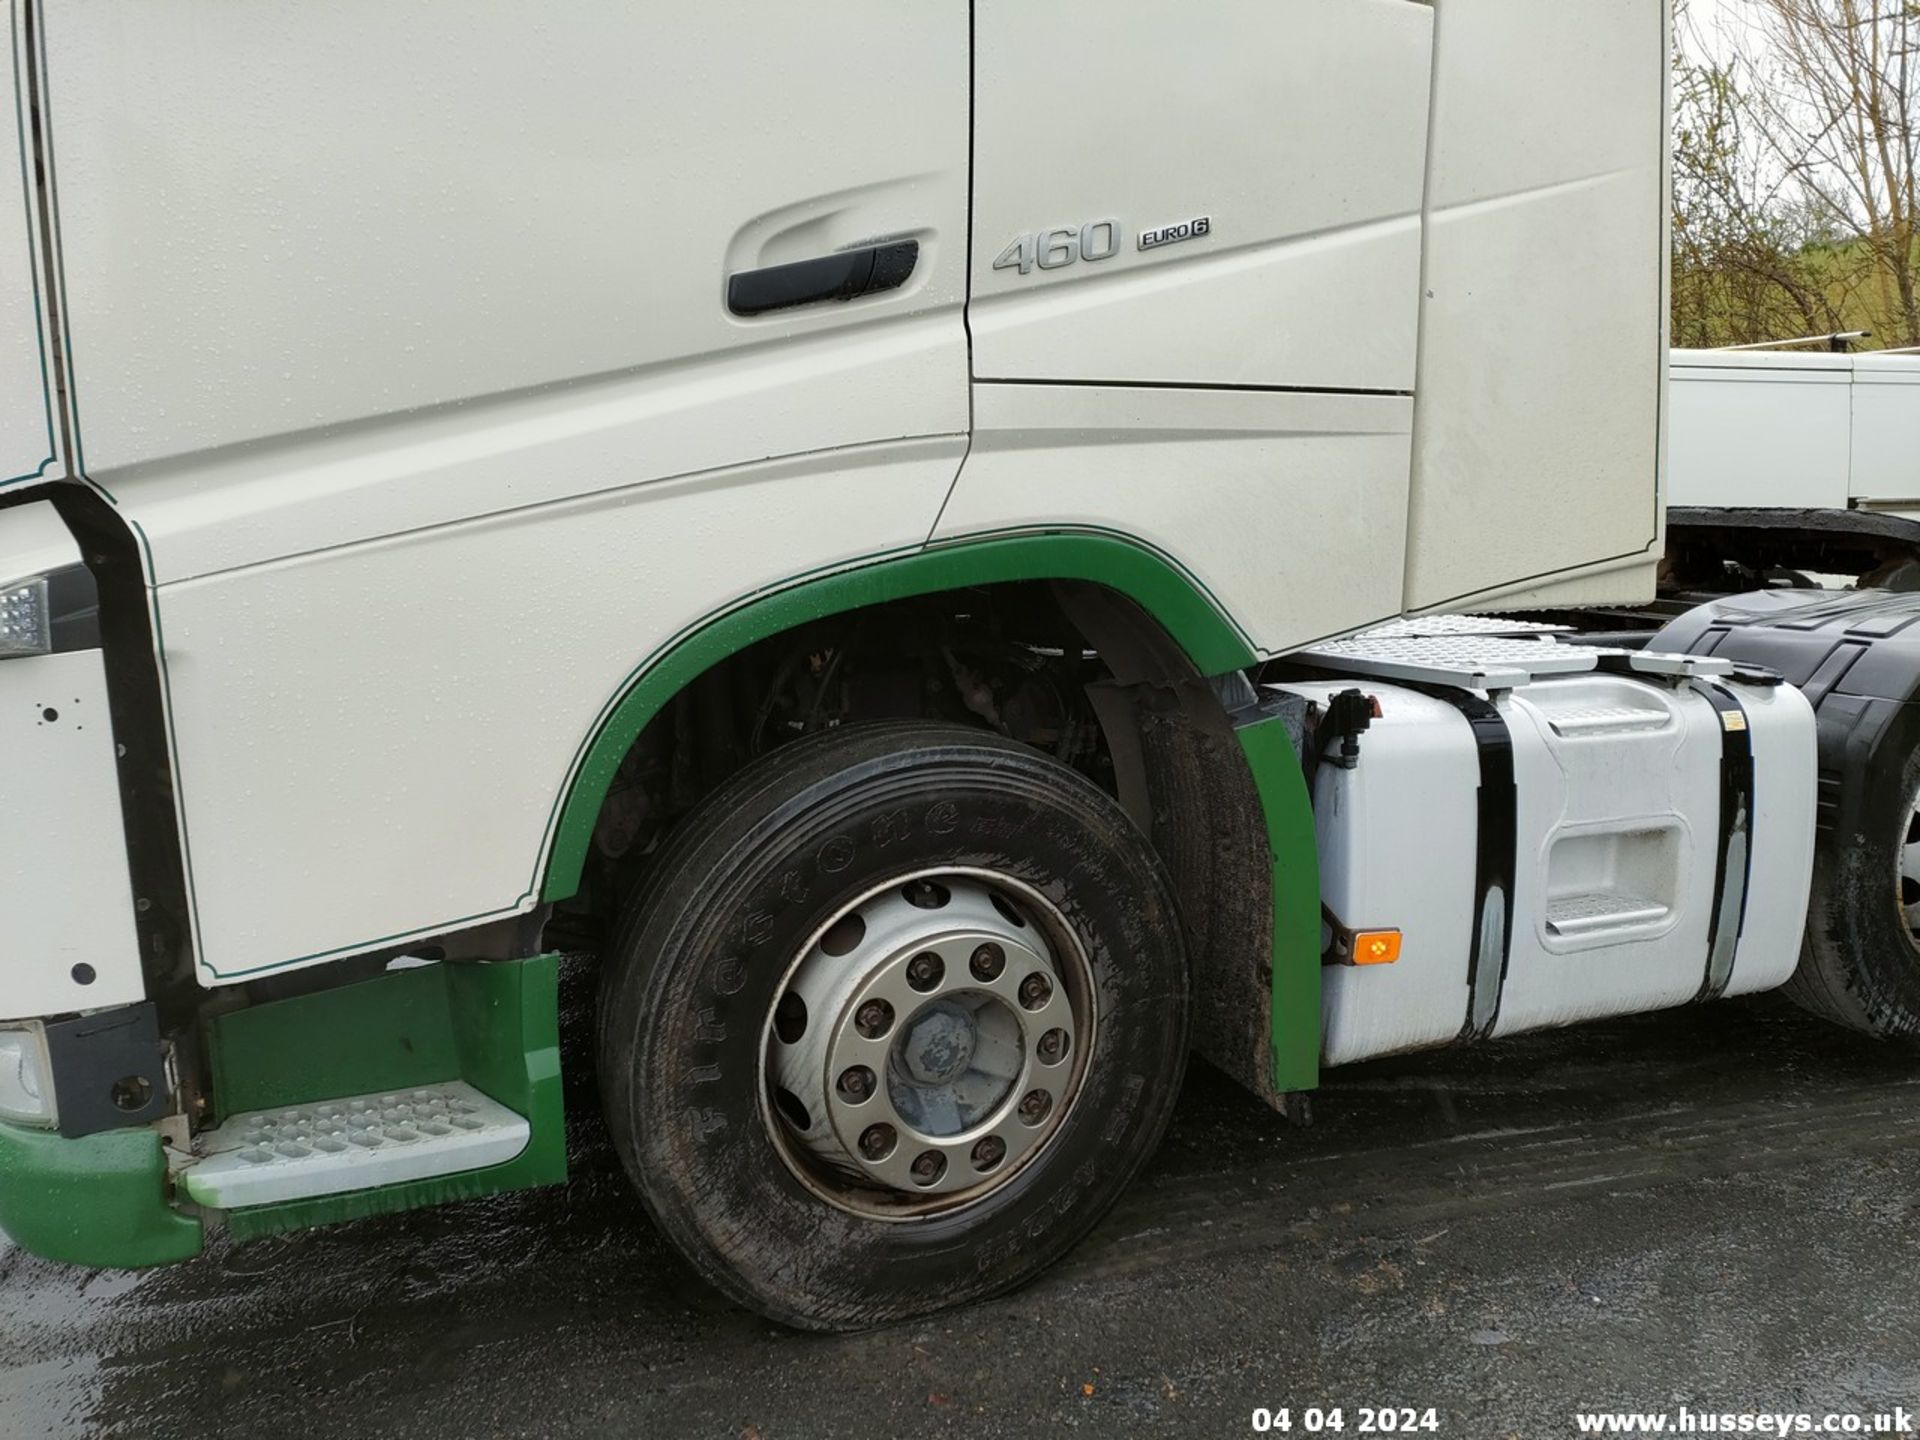 15/65 VOLVO FH - 12777cc 2dr Tractor Unit (White) - Image 12 of 34